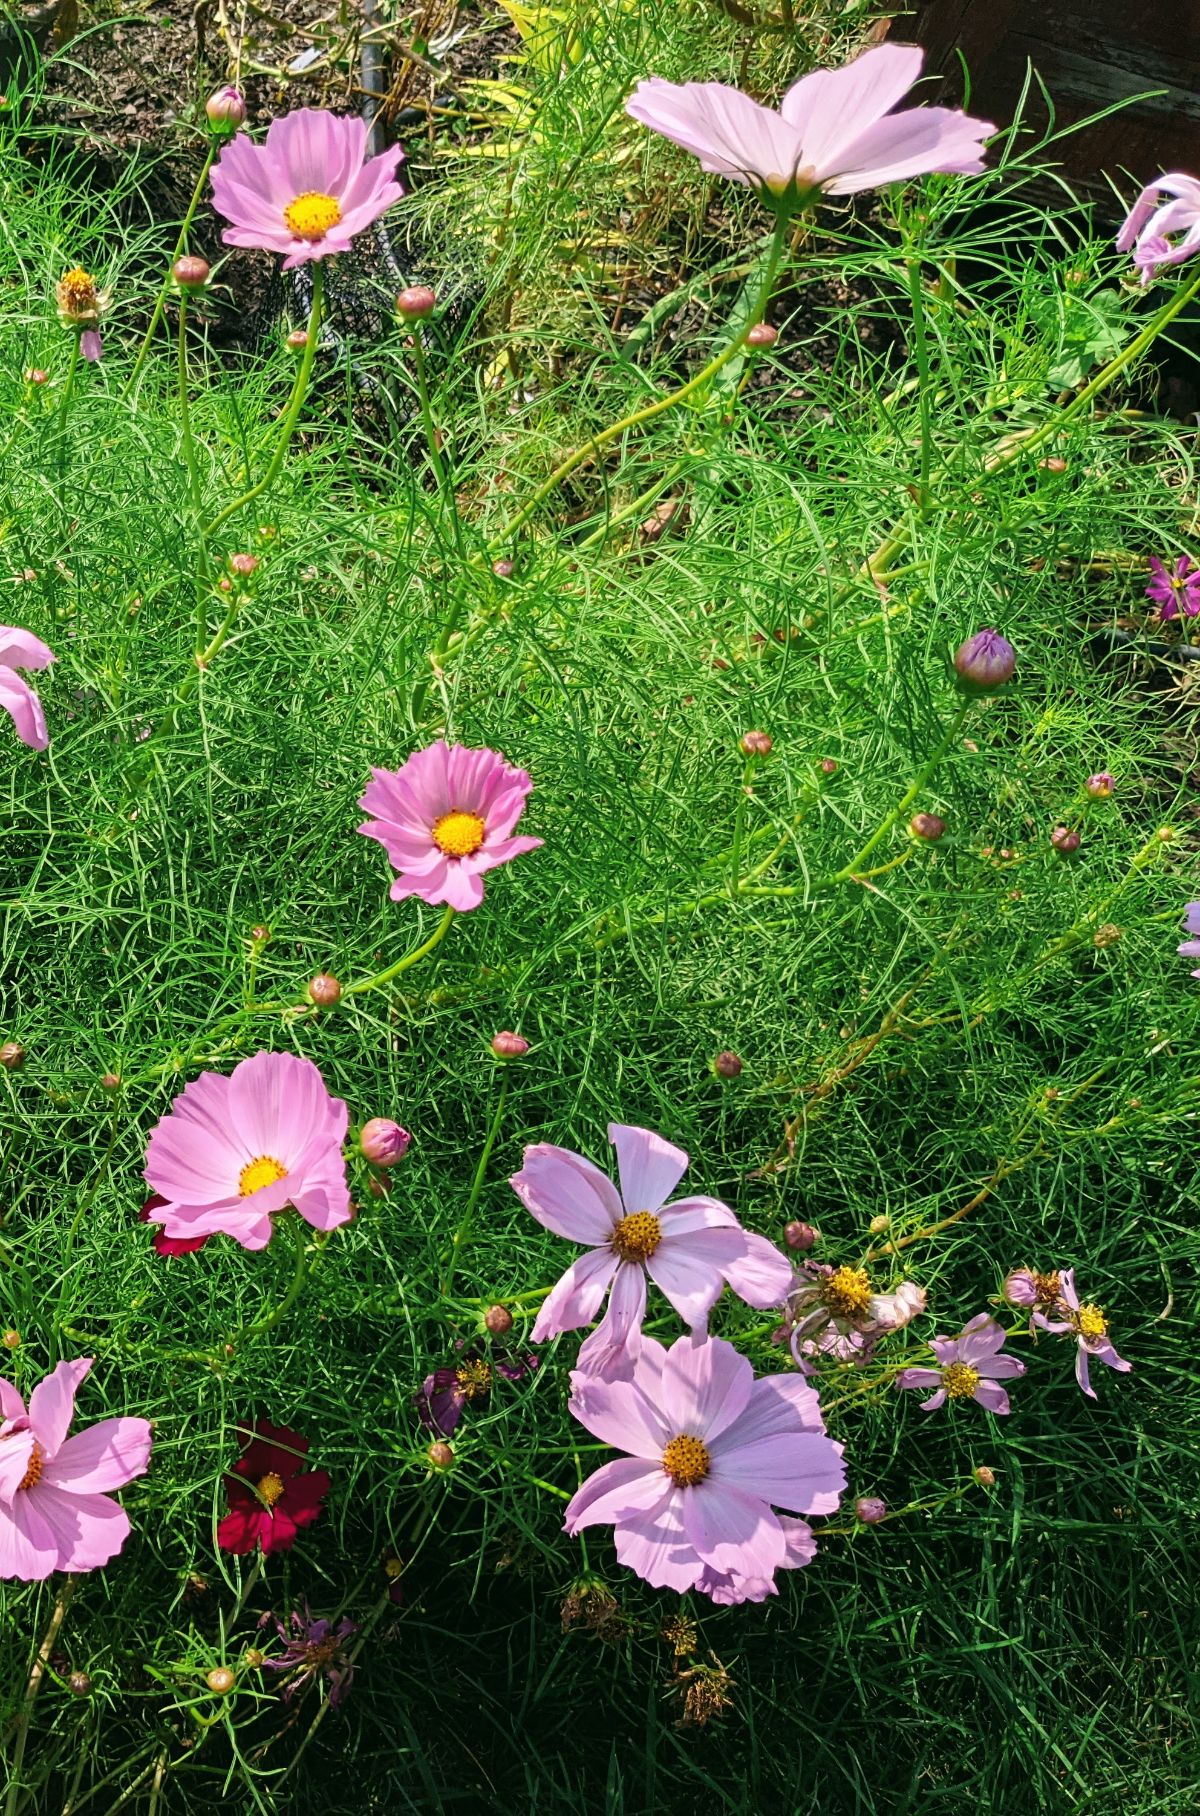 Cosmos growing tall and reaching toward the sun